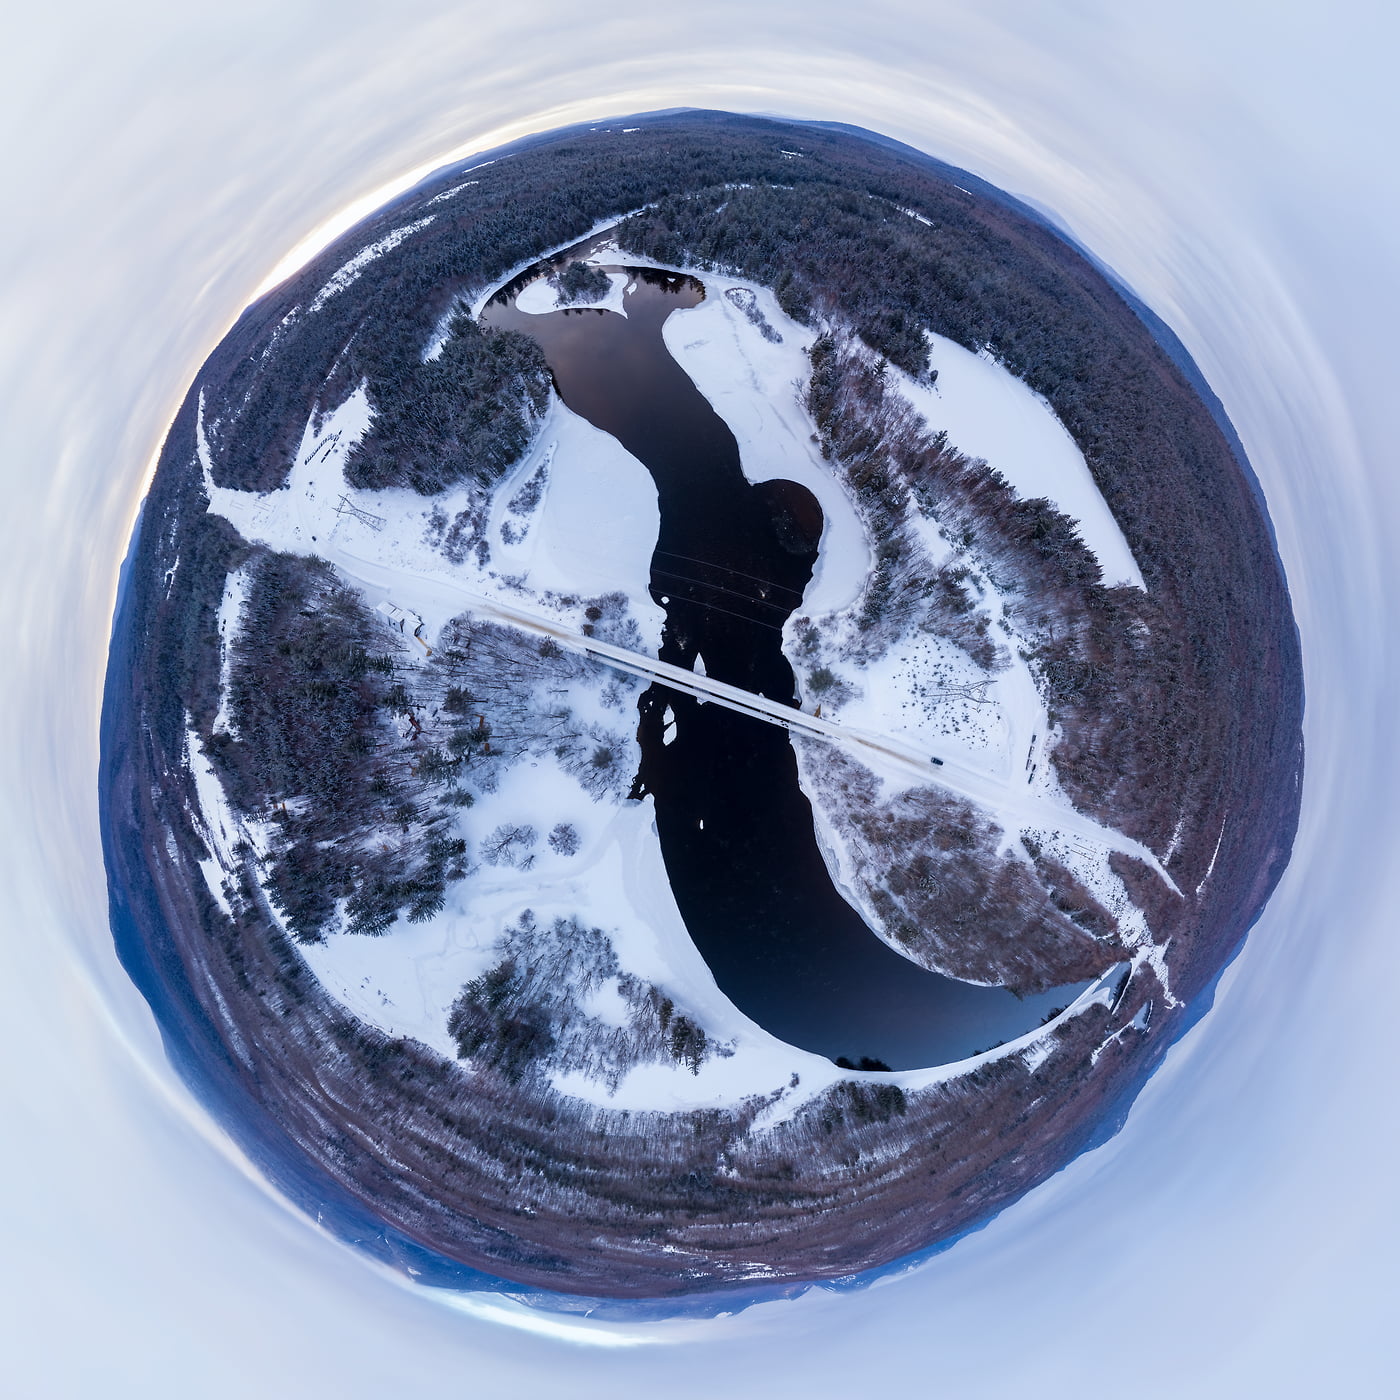 303 megapixels! A very high resolution, large-format VAST photo of Abol Bridge in Millinocket, Maine in winter with snow; fine art aerial 360-degree panorama photograph created by Aaron Priest in New England.